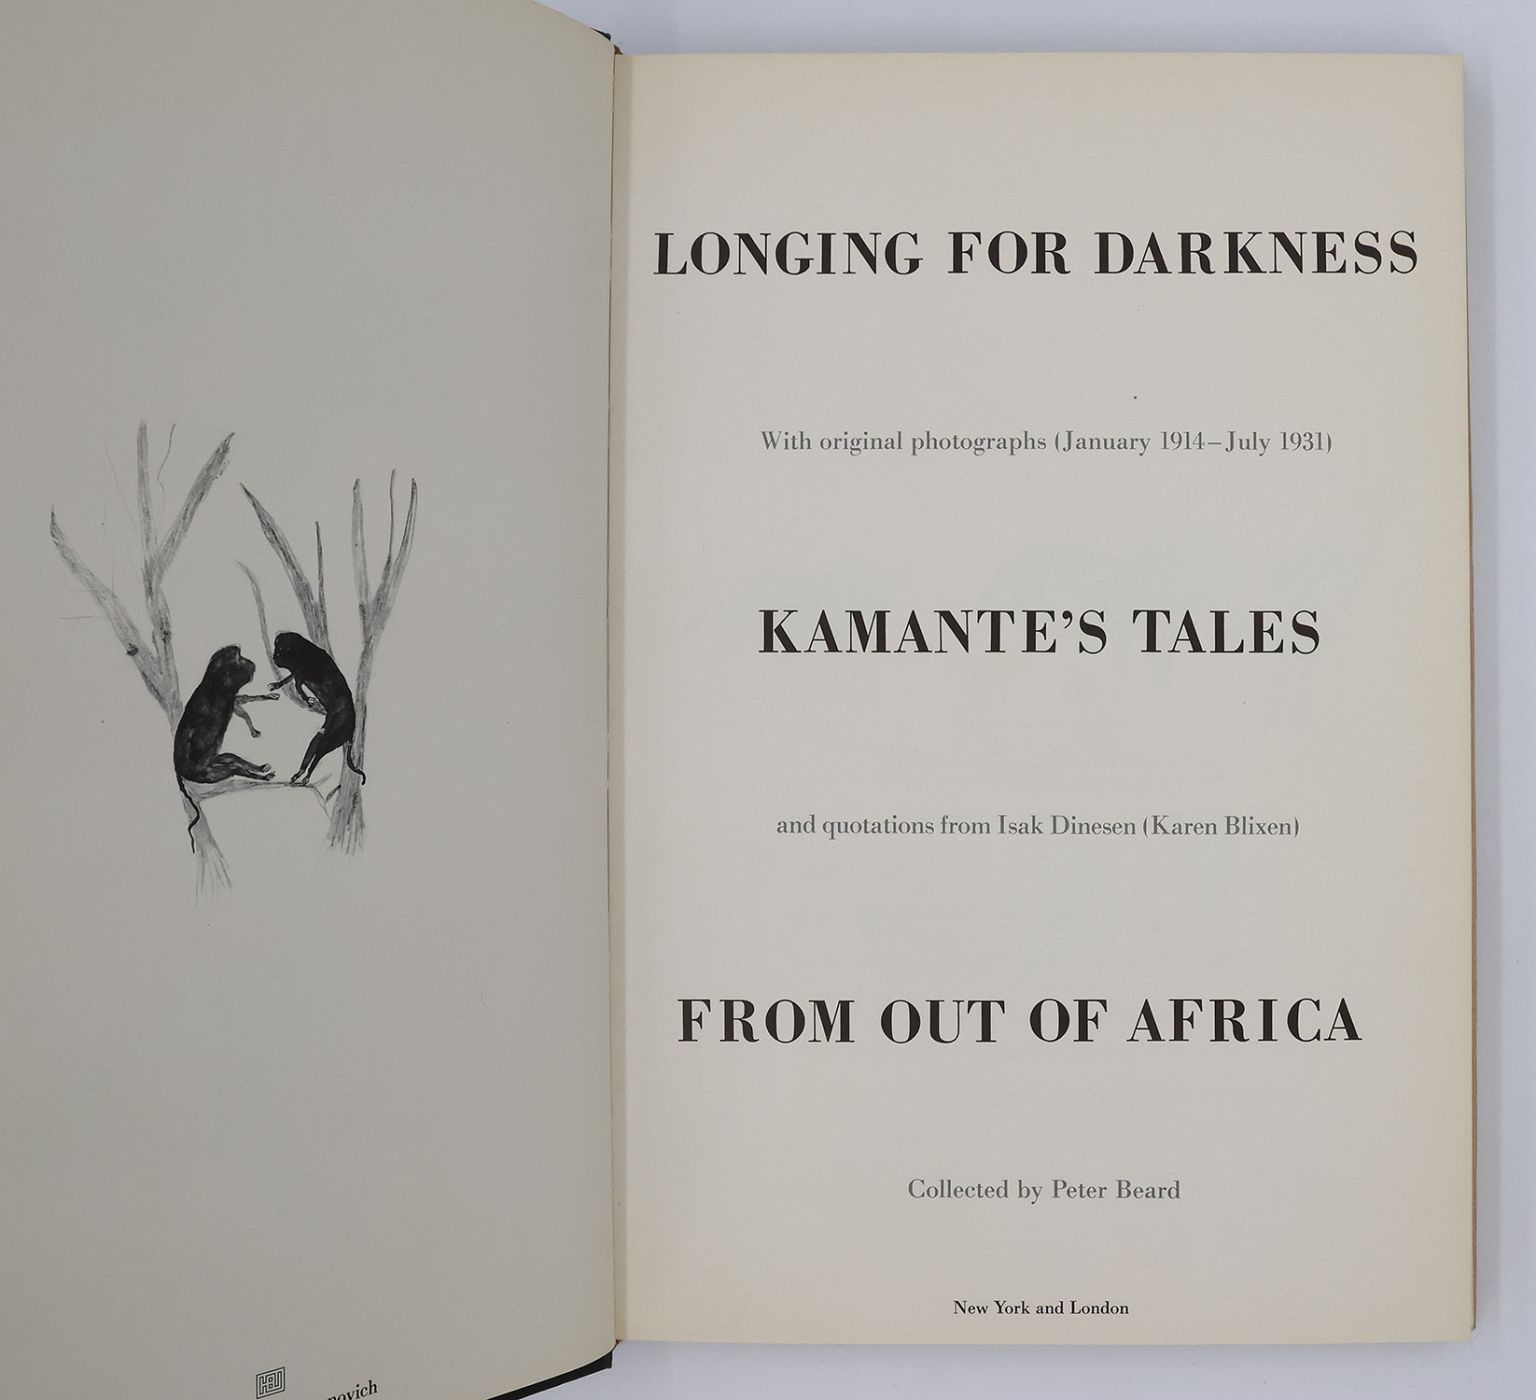 LONGING FOR DARKNESS: KAMANTE'S TALES FROM 